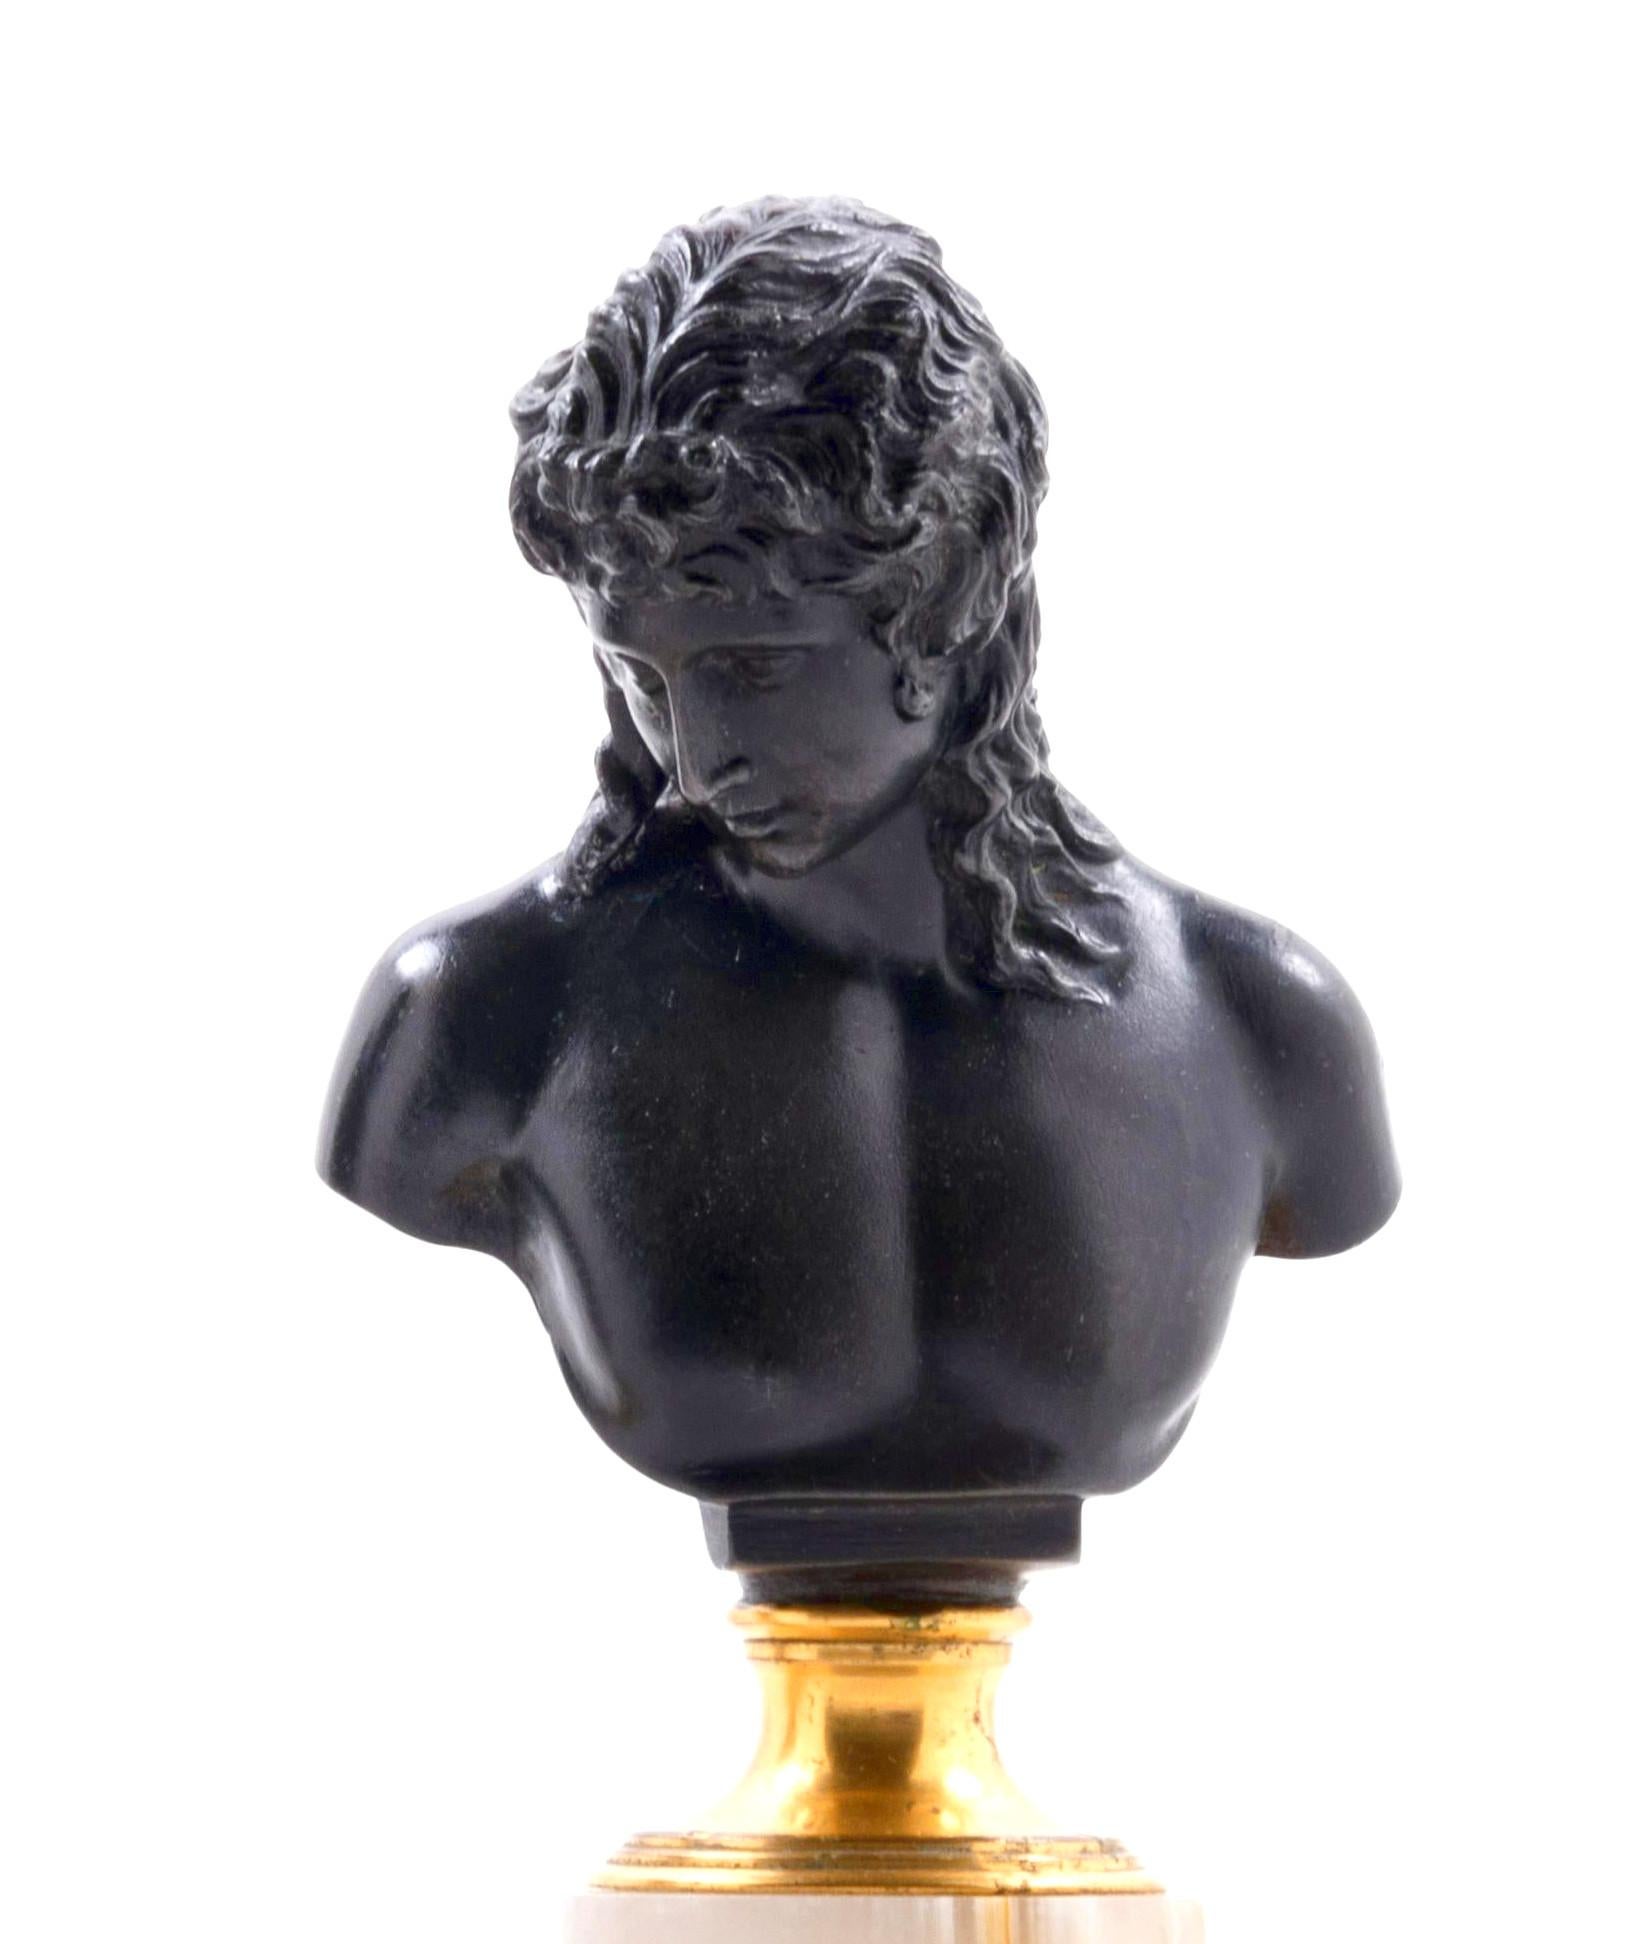 Pair of German Bronze and Onyx of Grand Tour Busts of Hermes and Ariadne

A wonderful pair of Grand Tour bronze busts of Ariadne based on the antique original in the Vatican Museum of Art in Rome and Hermes of Praxiteles the original being from the